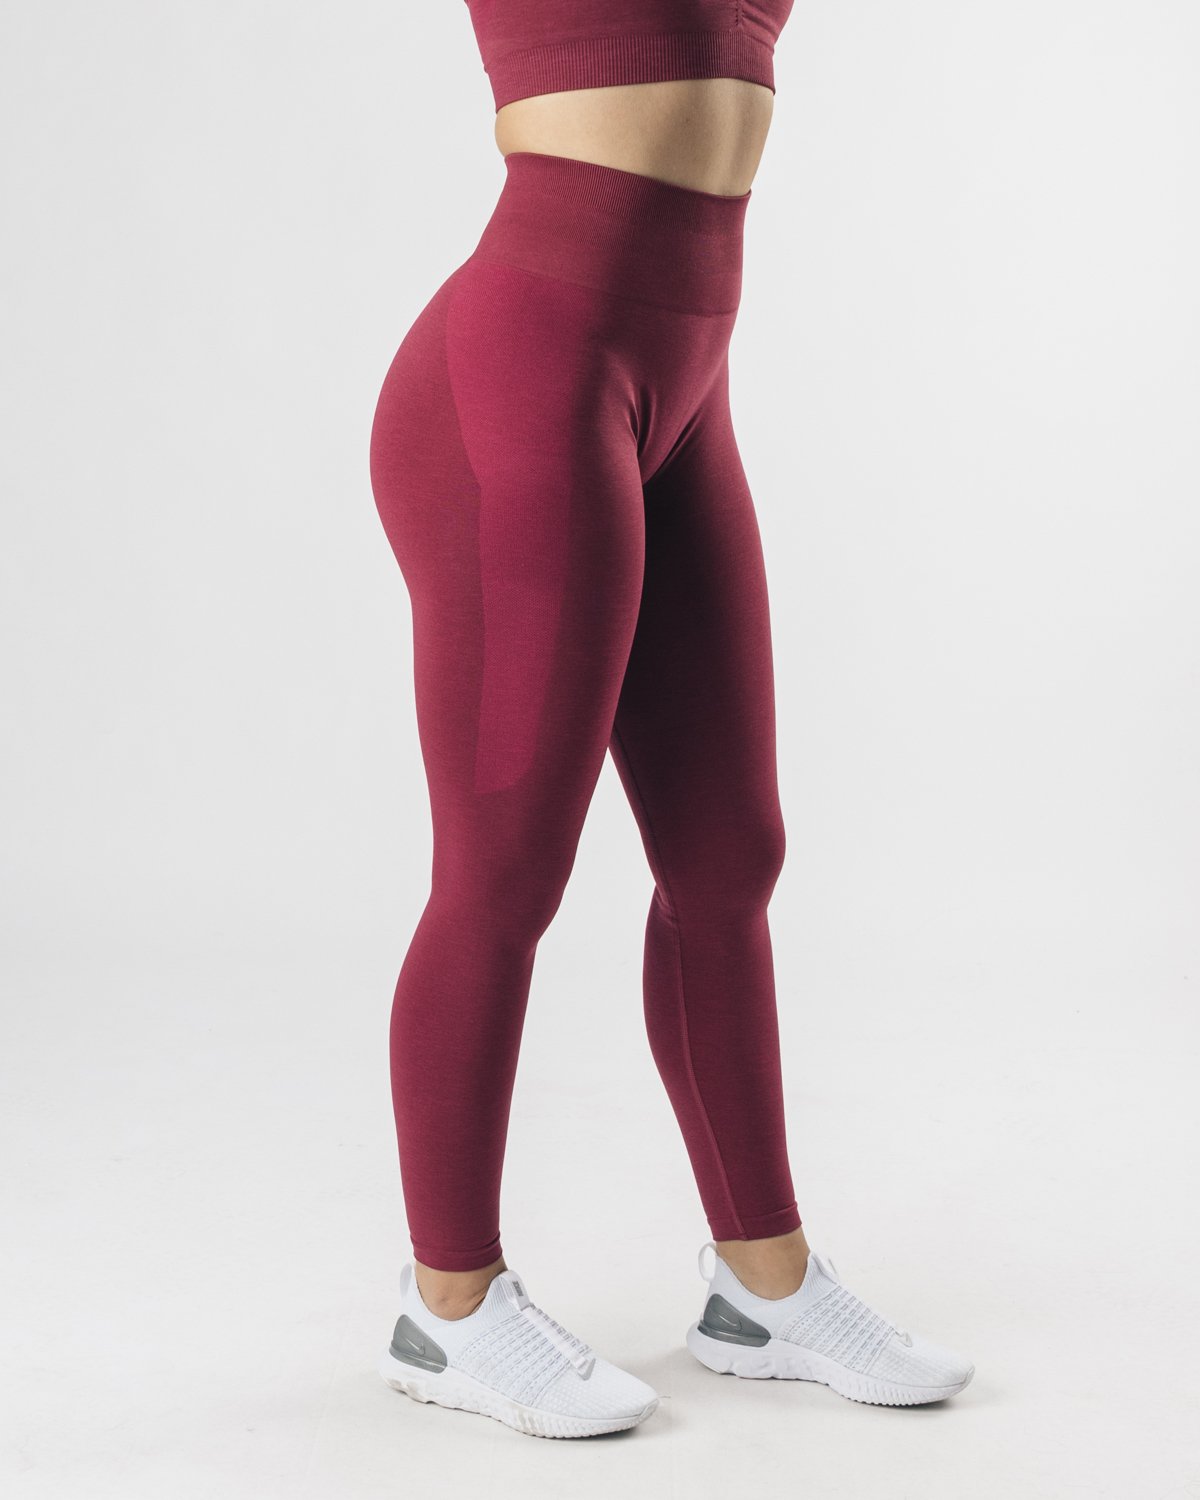 Are Alphalete Leggings Worth It We Tested  International Society of  Precision Agriculture